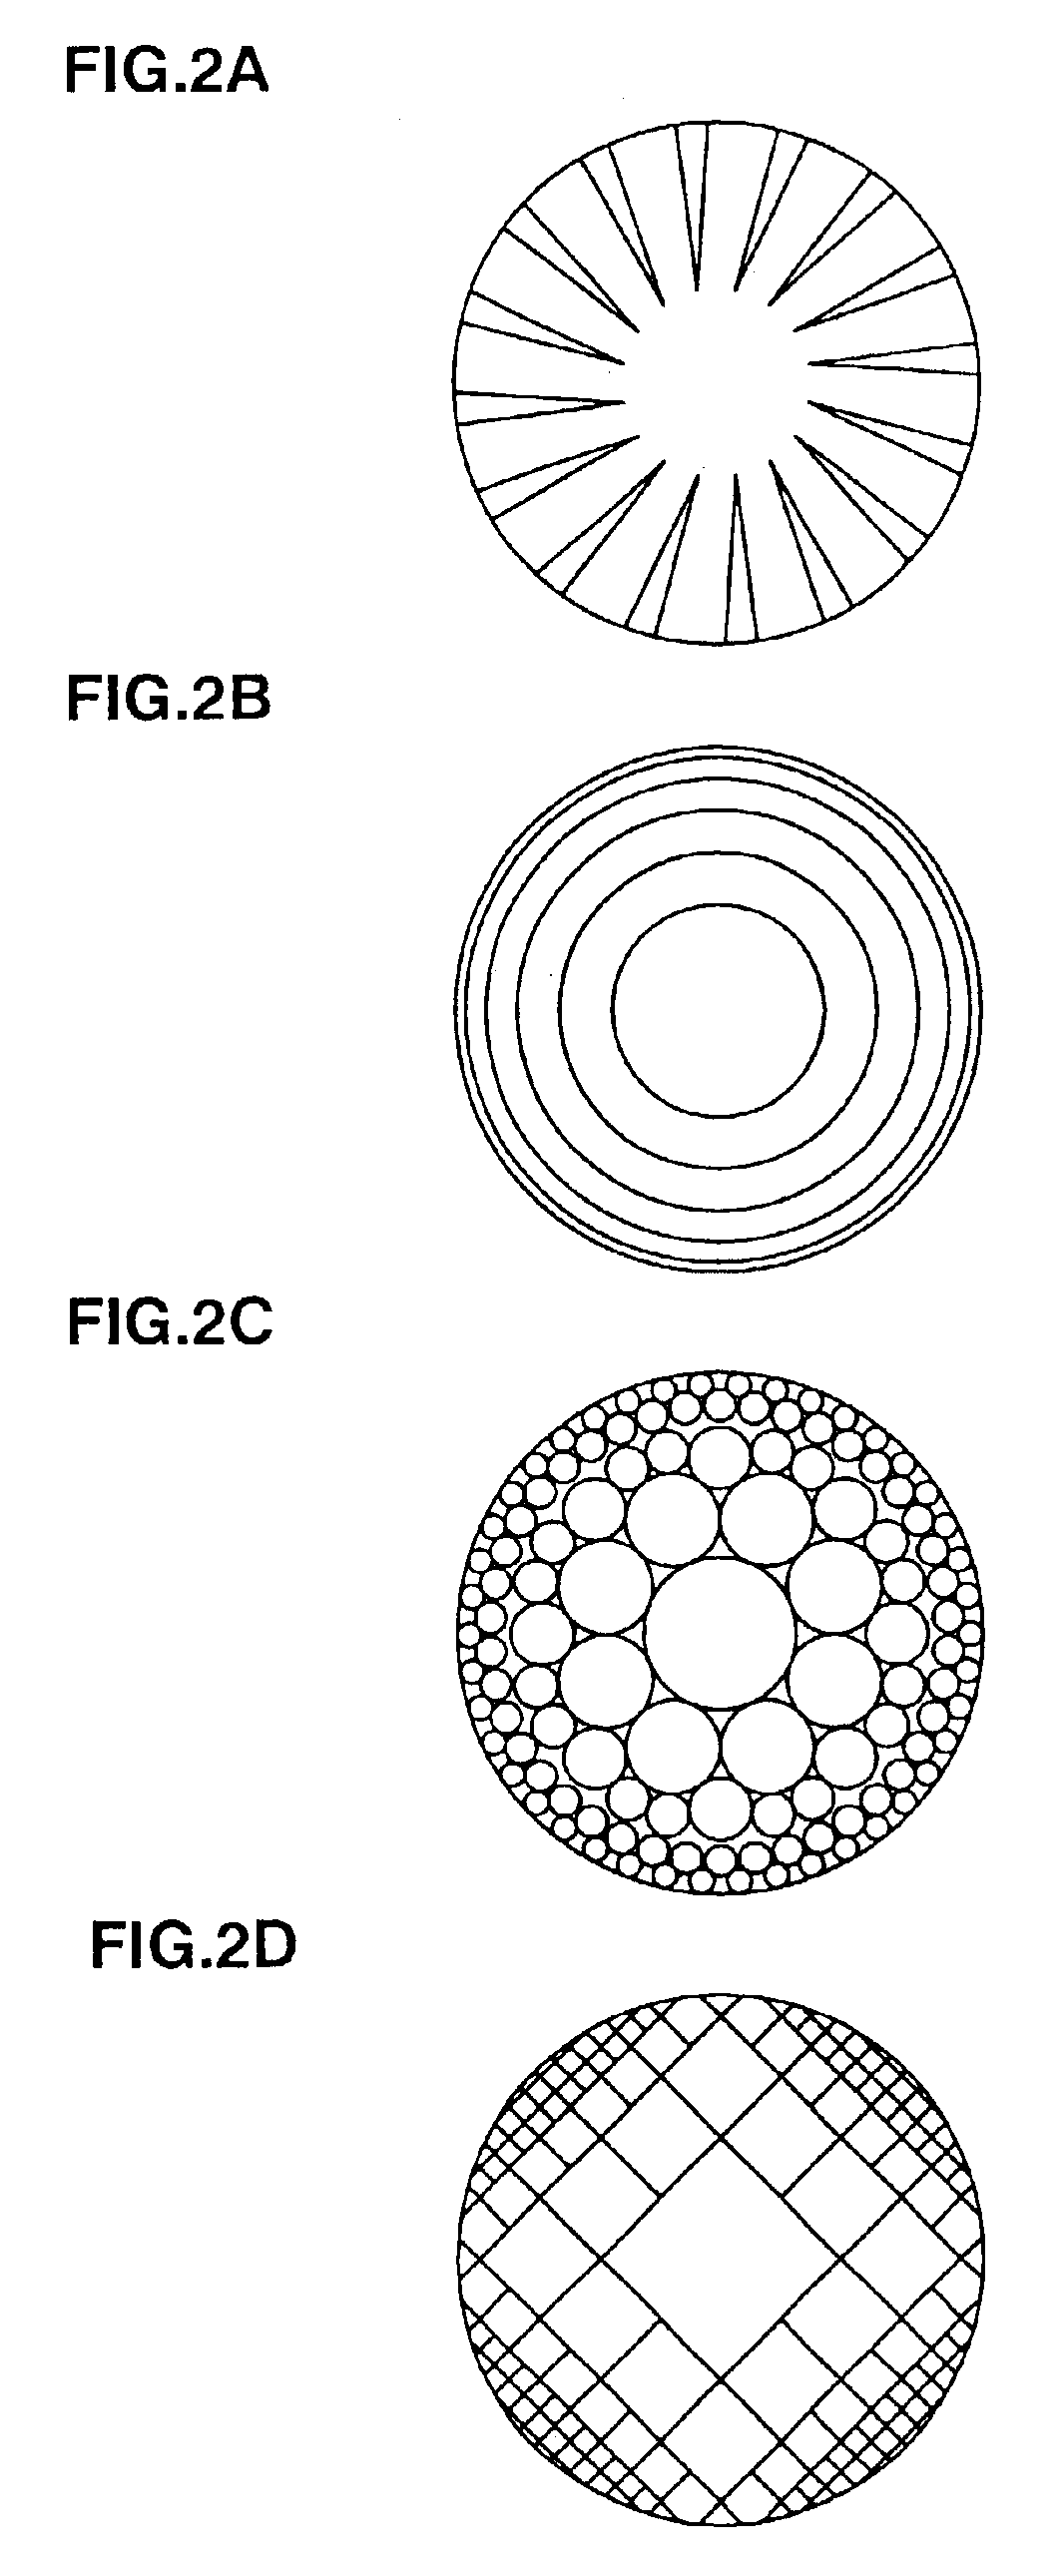 Semiconductor manufacturing method